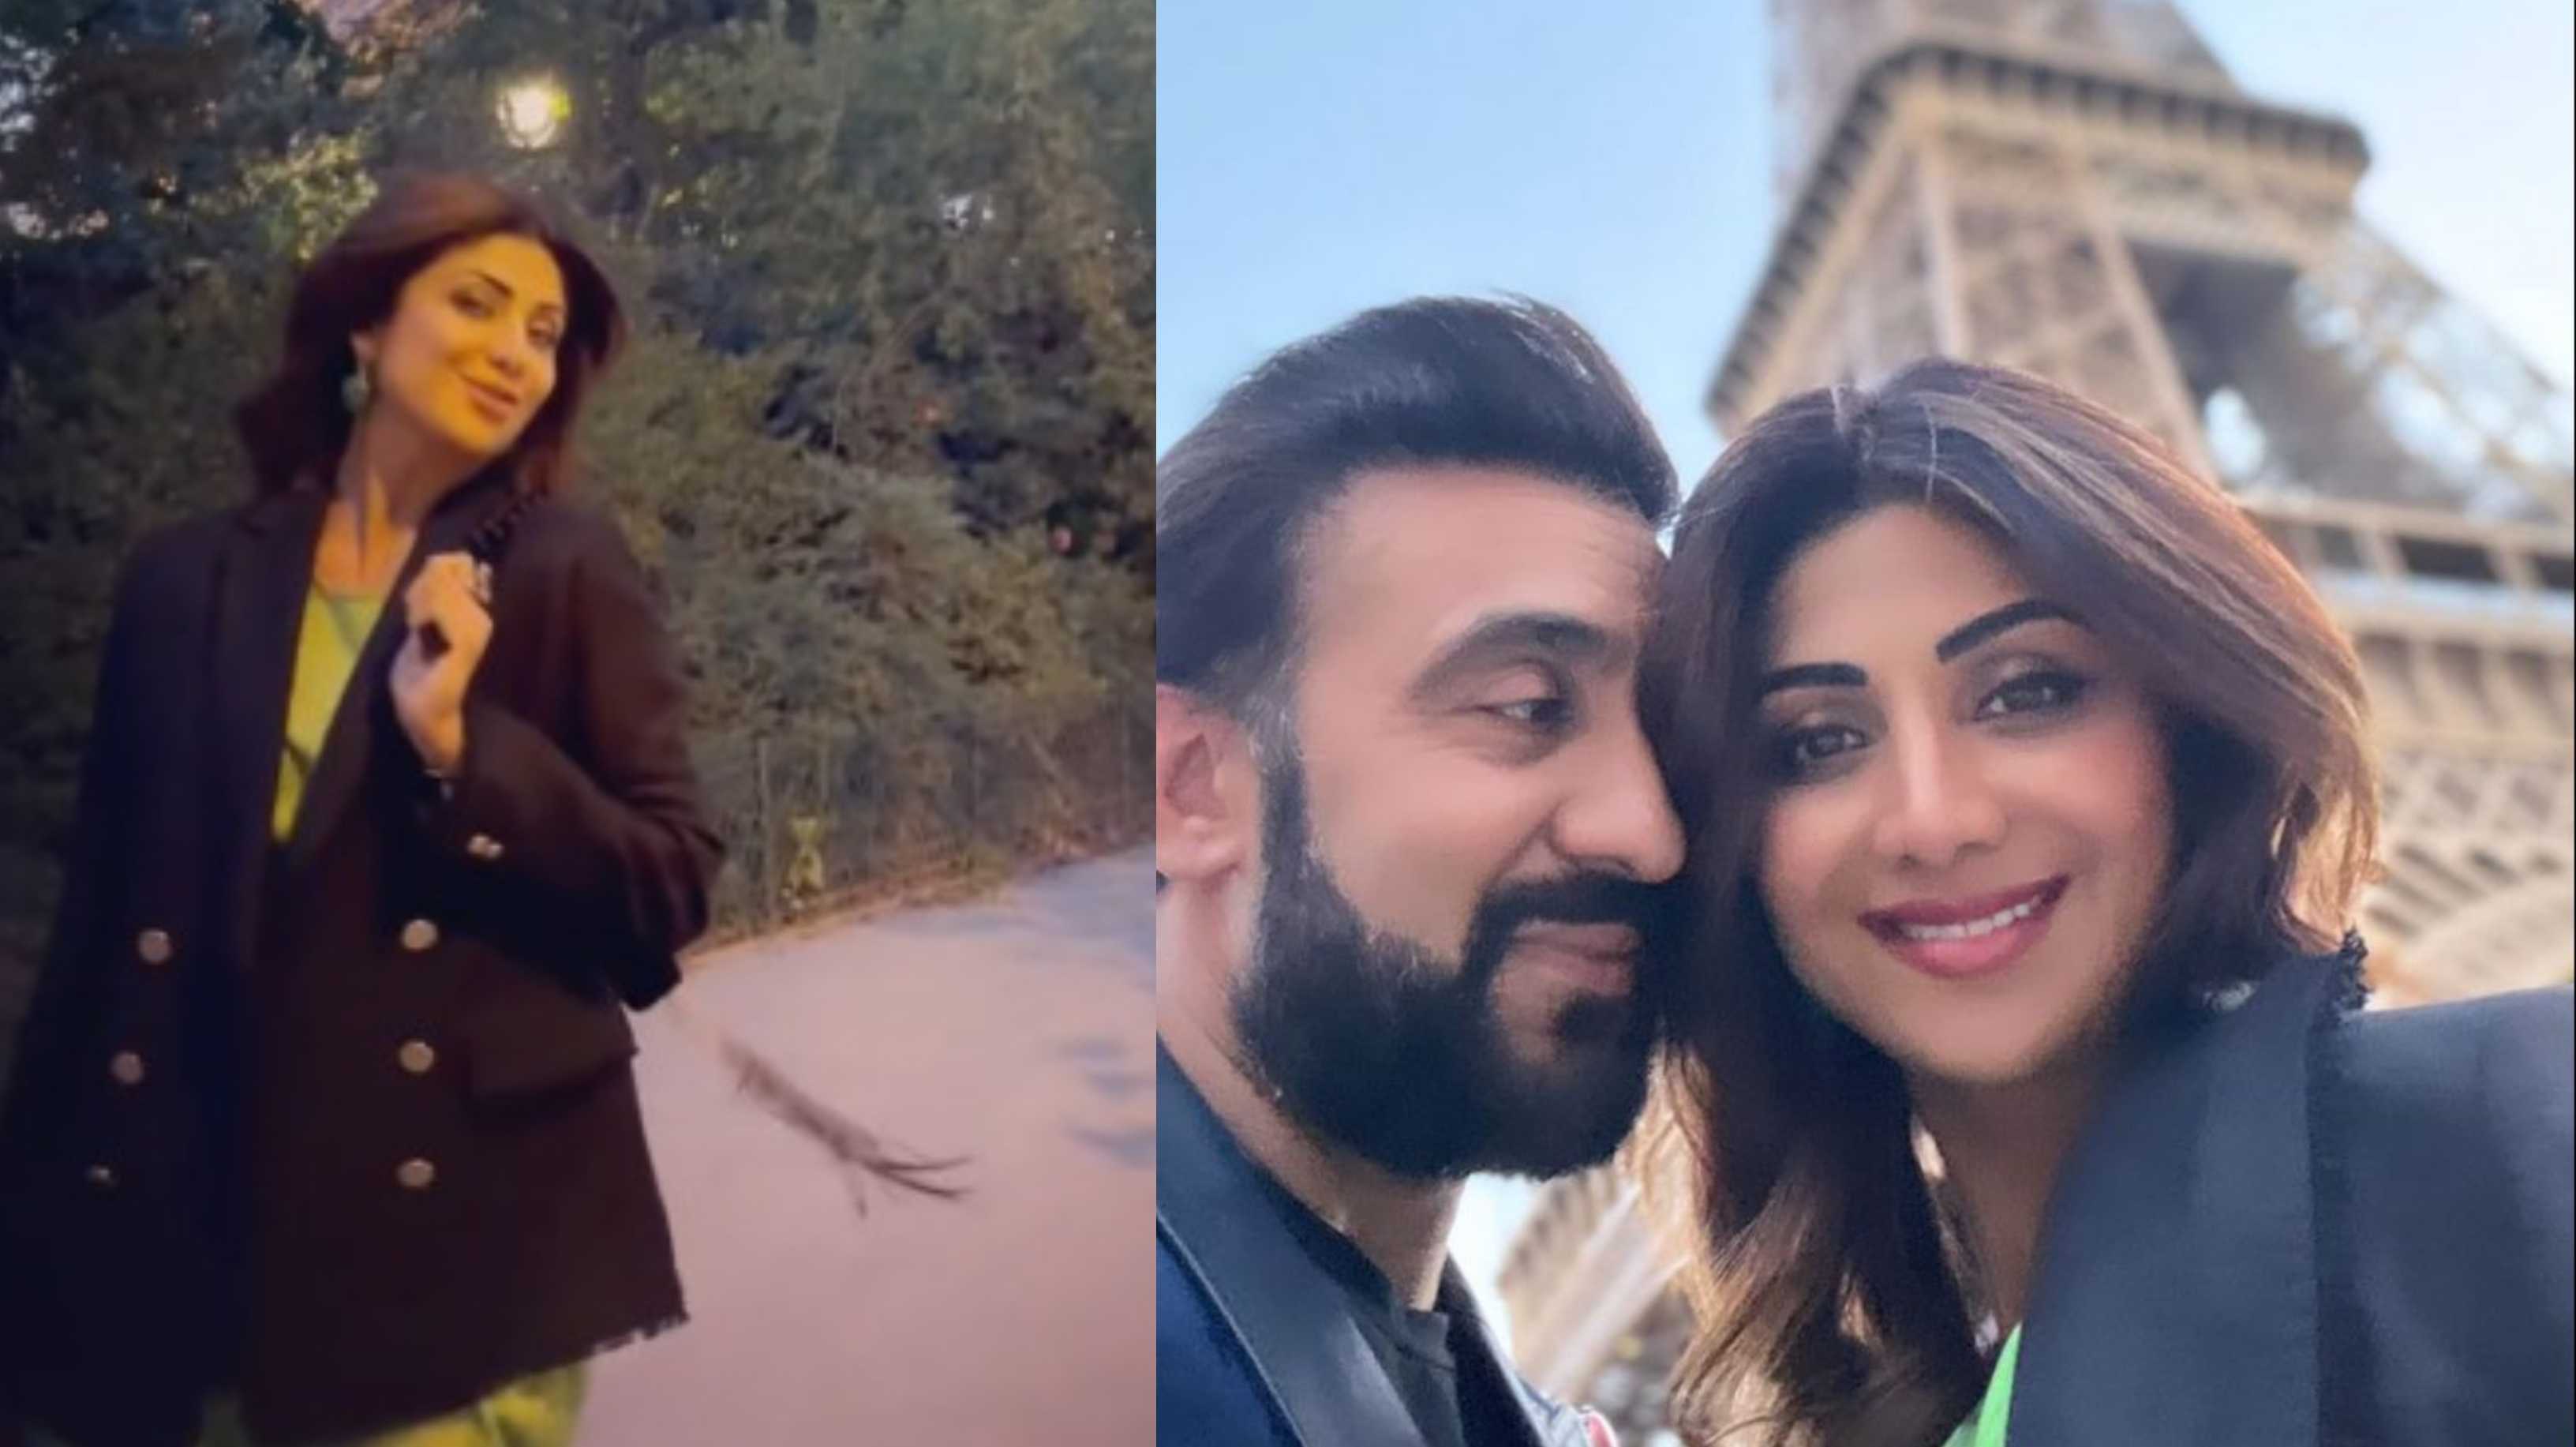 Shilpa Shetty shares a romantic selfie with husband Raj Kundra as they pose under the Eiffel Tower